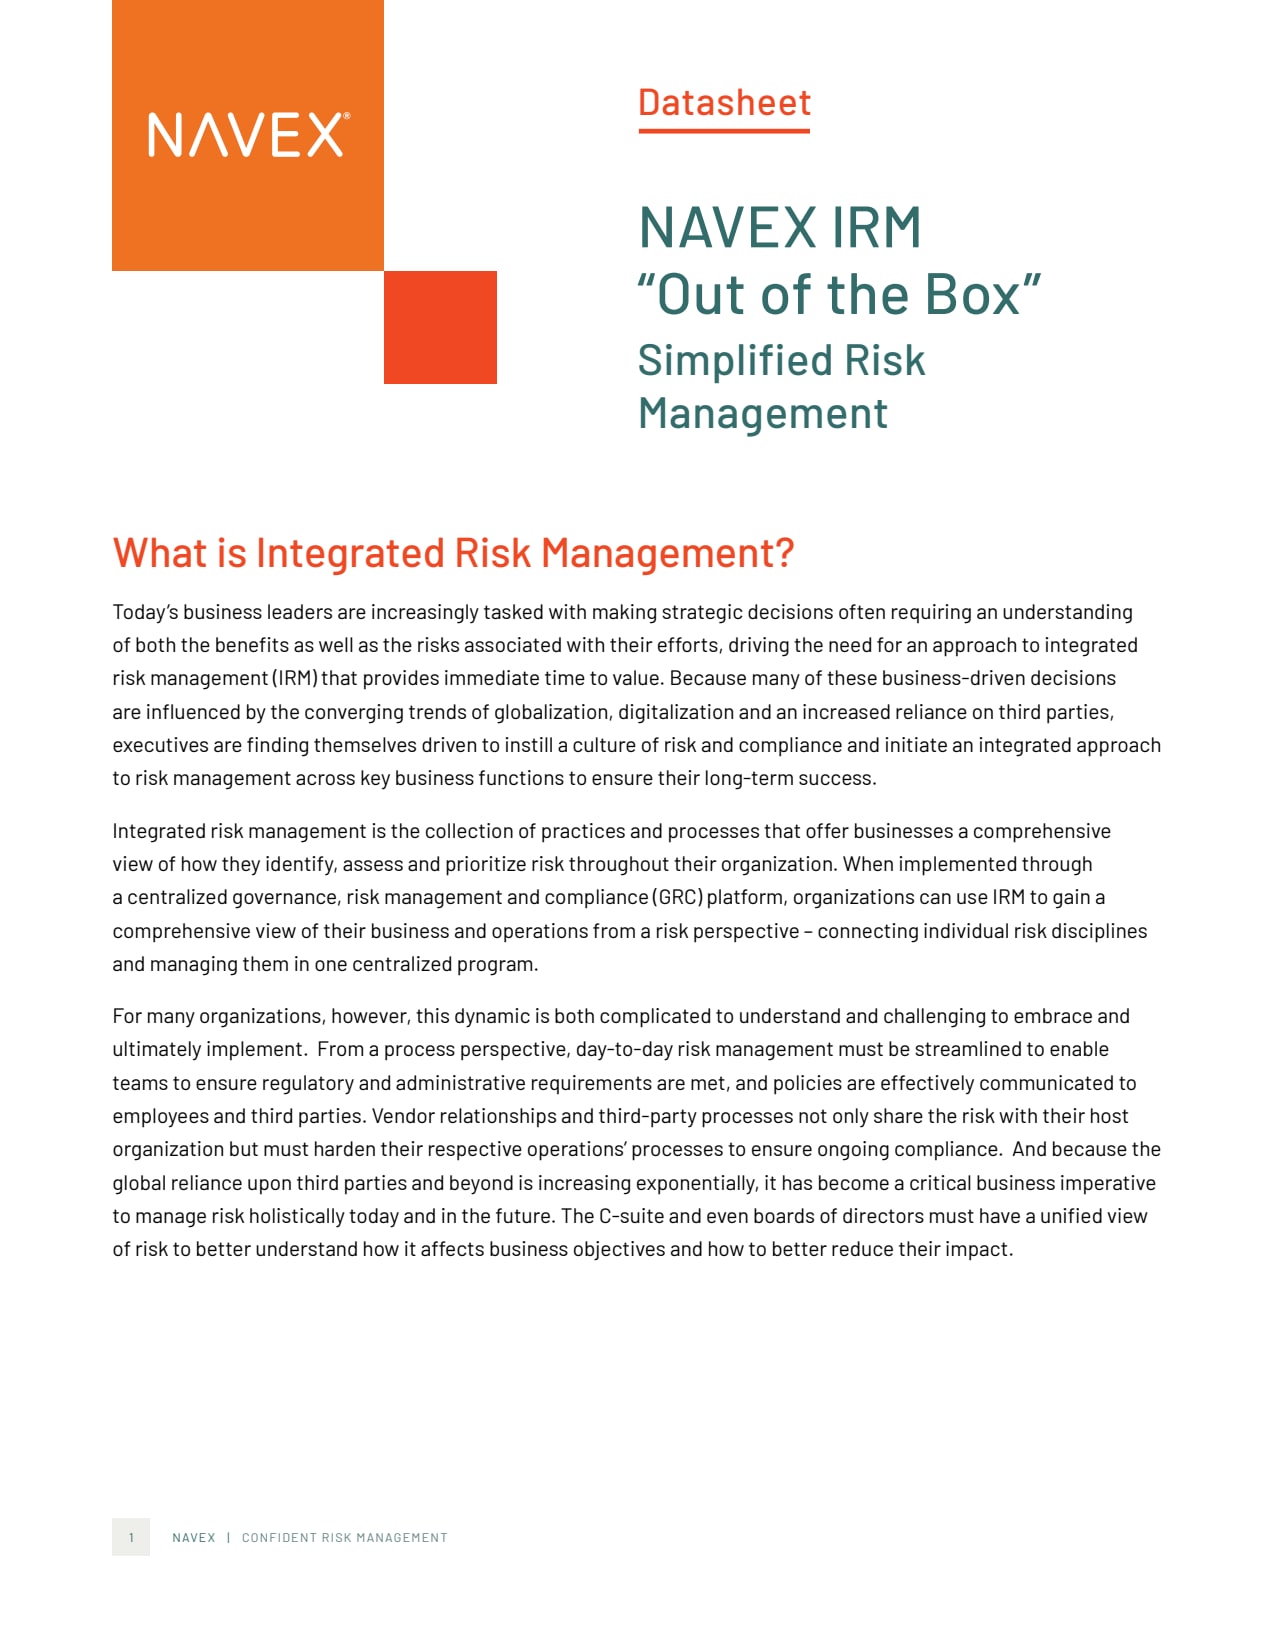 NAVEX IRM  “Out of the Box” Simplified Risk Management